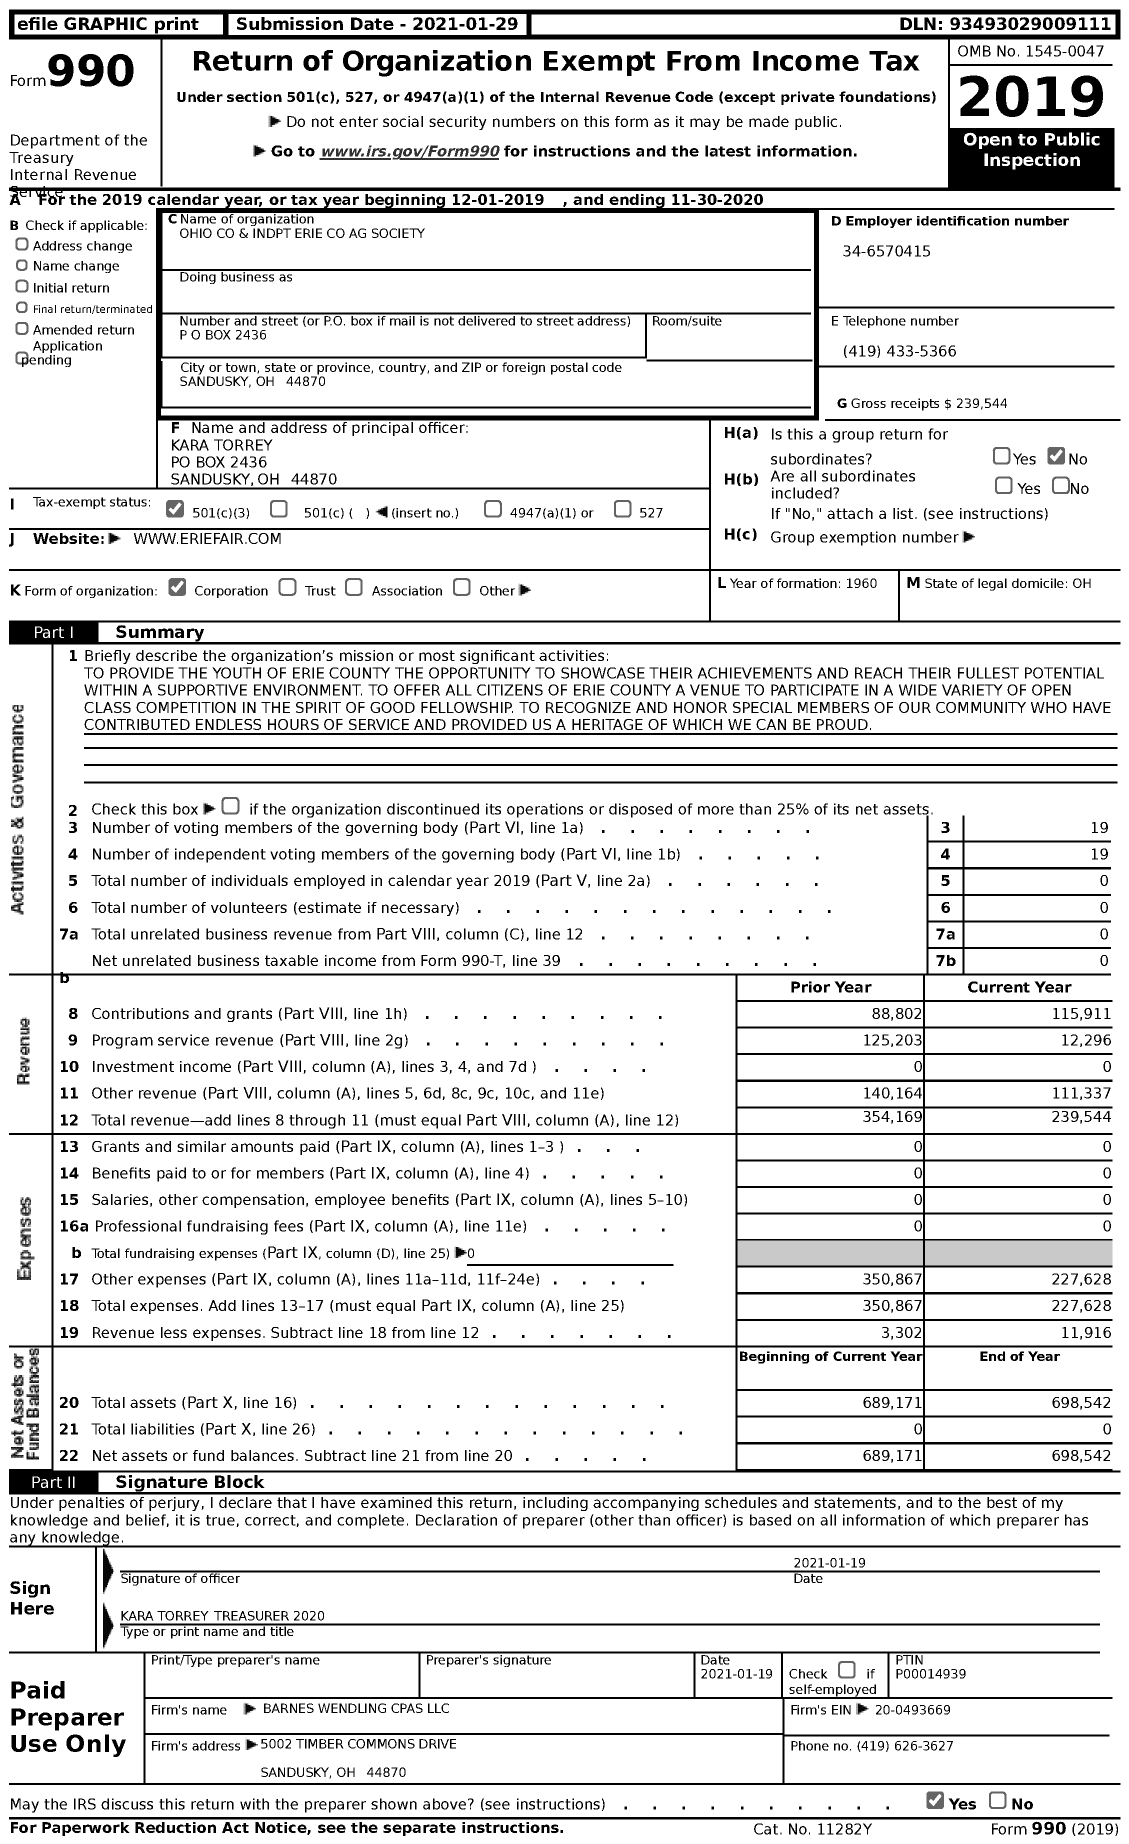 Image of first page of 2019 Form 990 for Ohio and Indpt Erie Ag Society